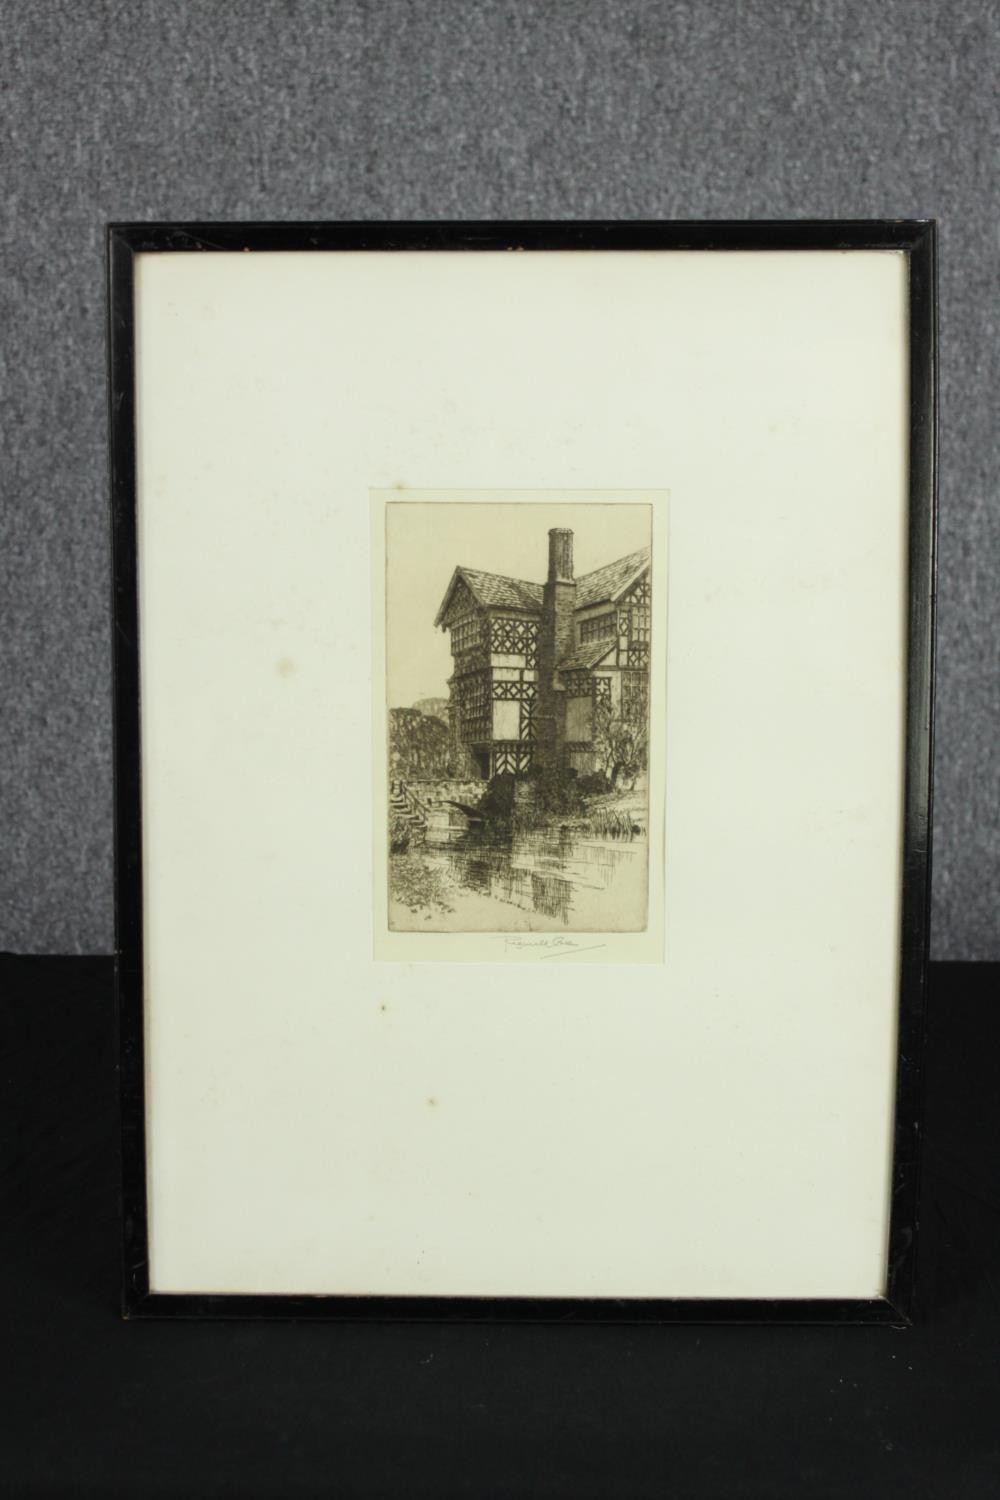 Etching. Little Morton Hall, Cheshire. Signed by the artist in pencil. Framed and glazed. H.47 W. - Image 2 of 4